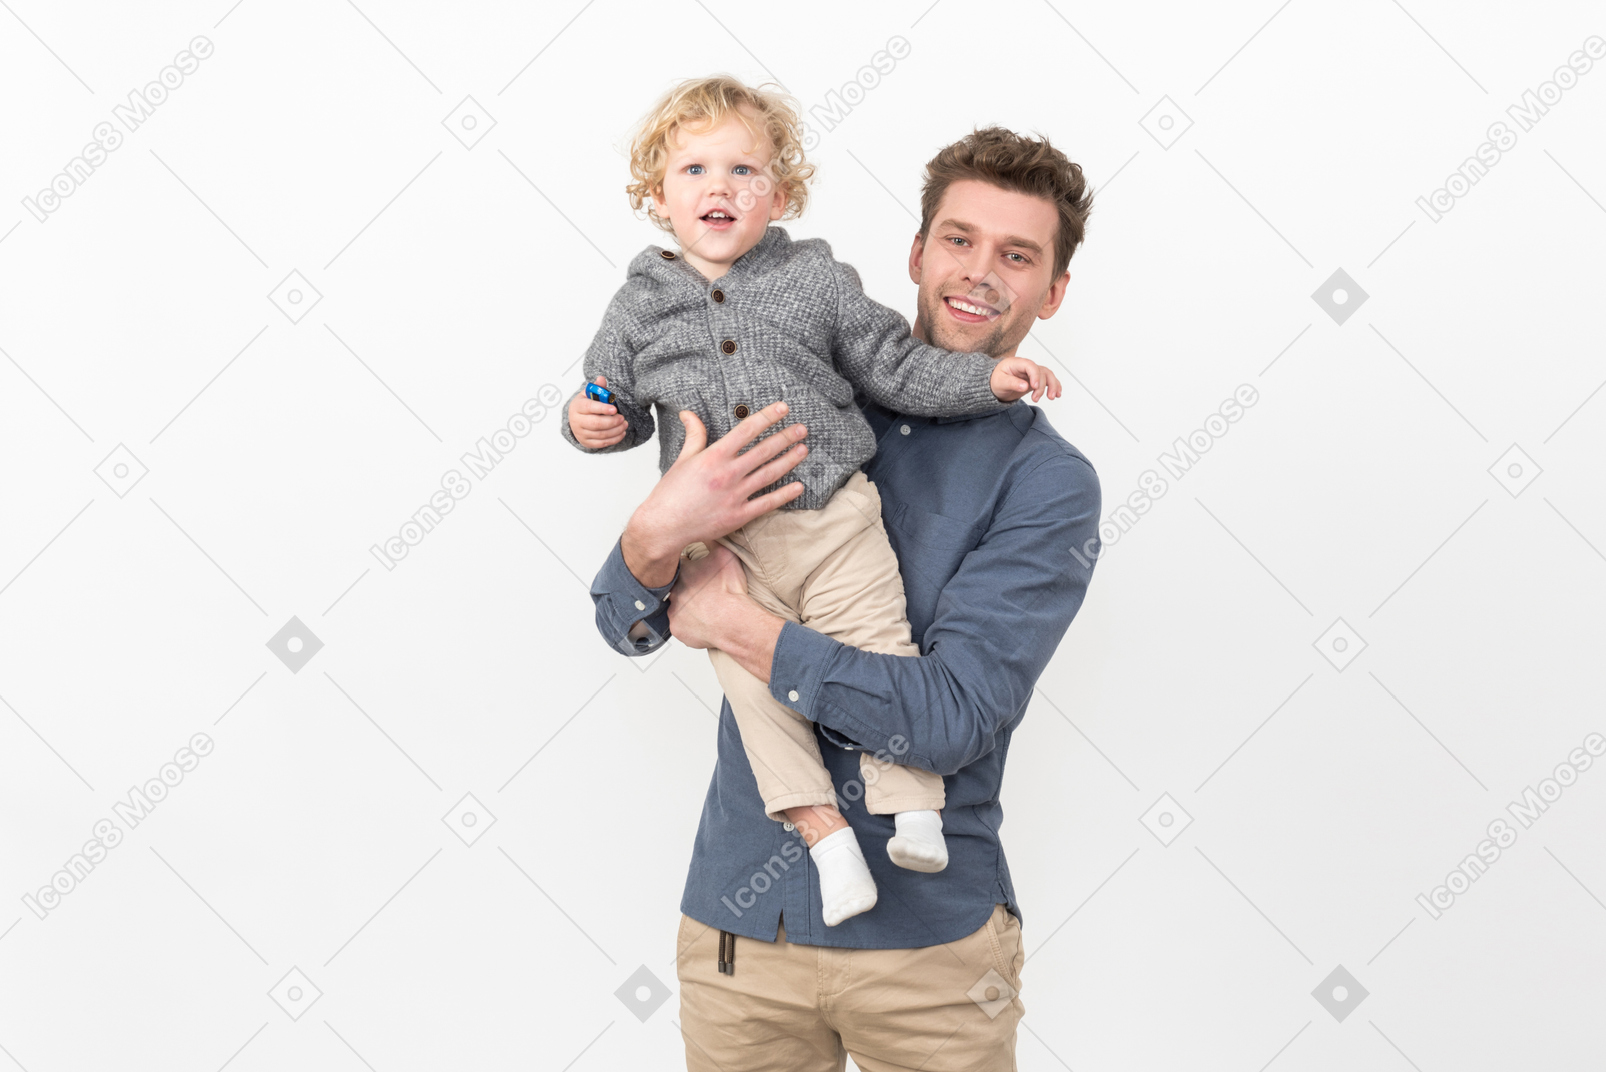 Smiling dad holding a baby boy